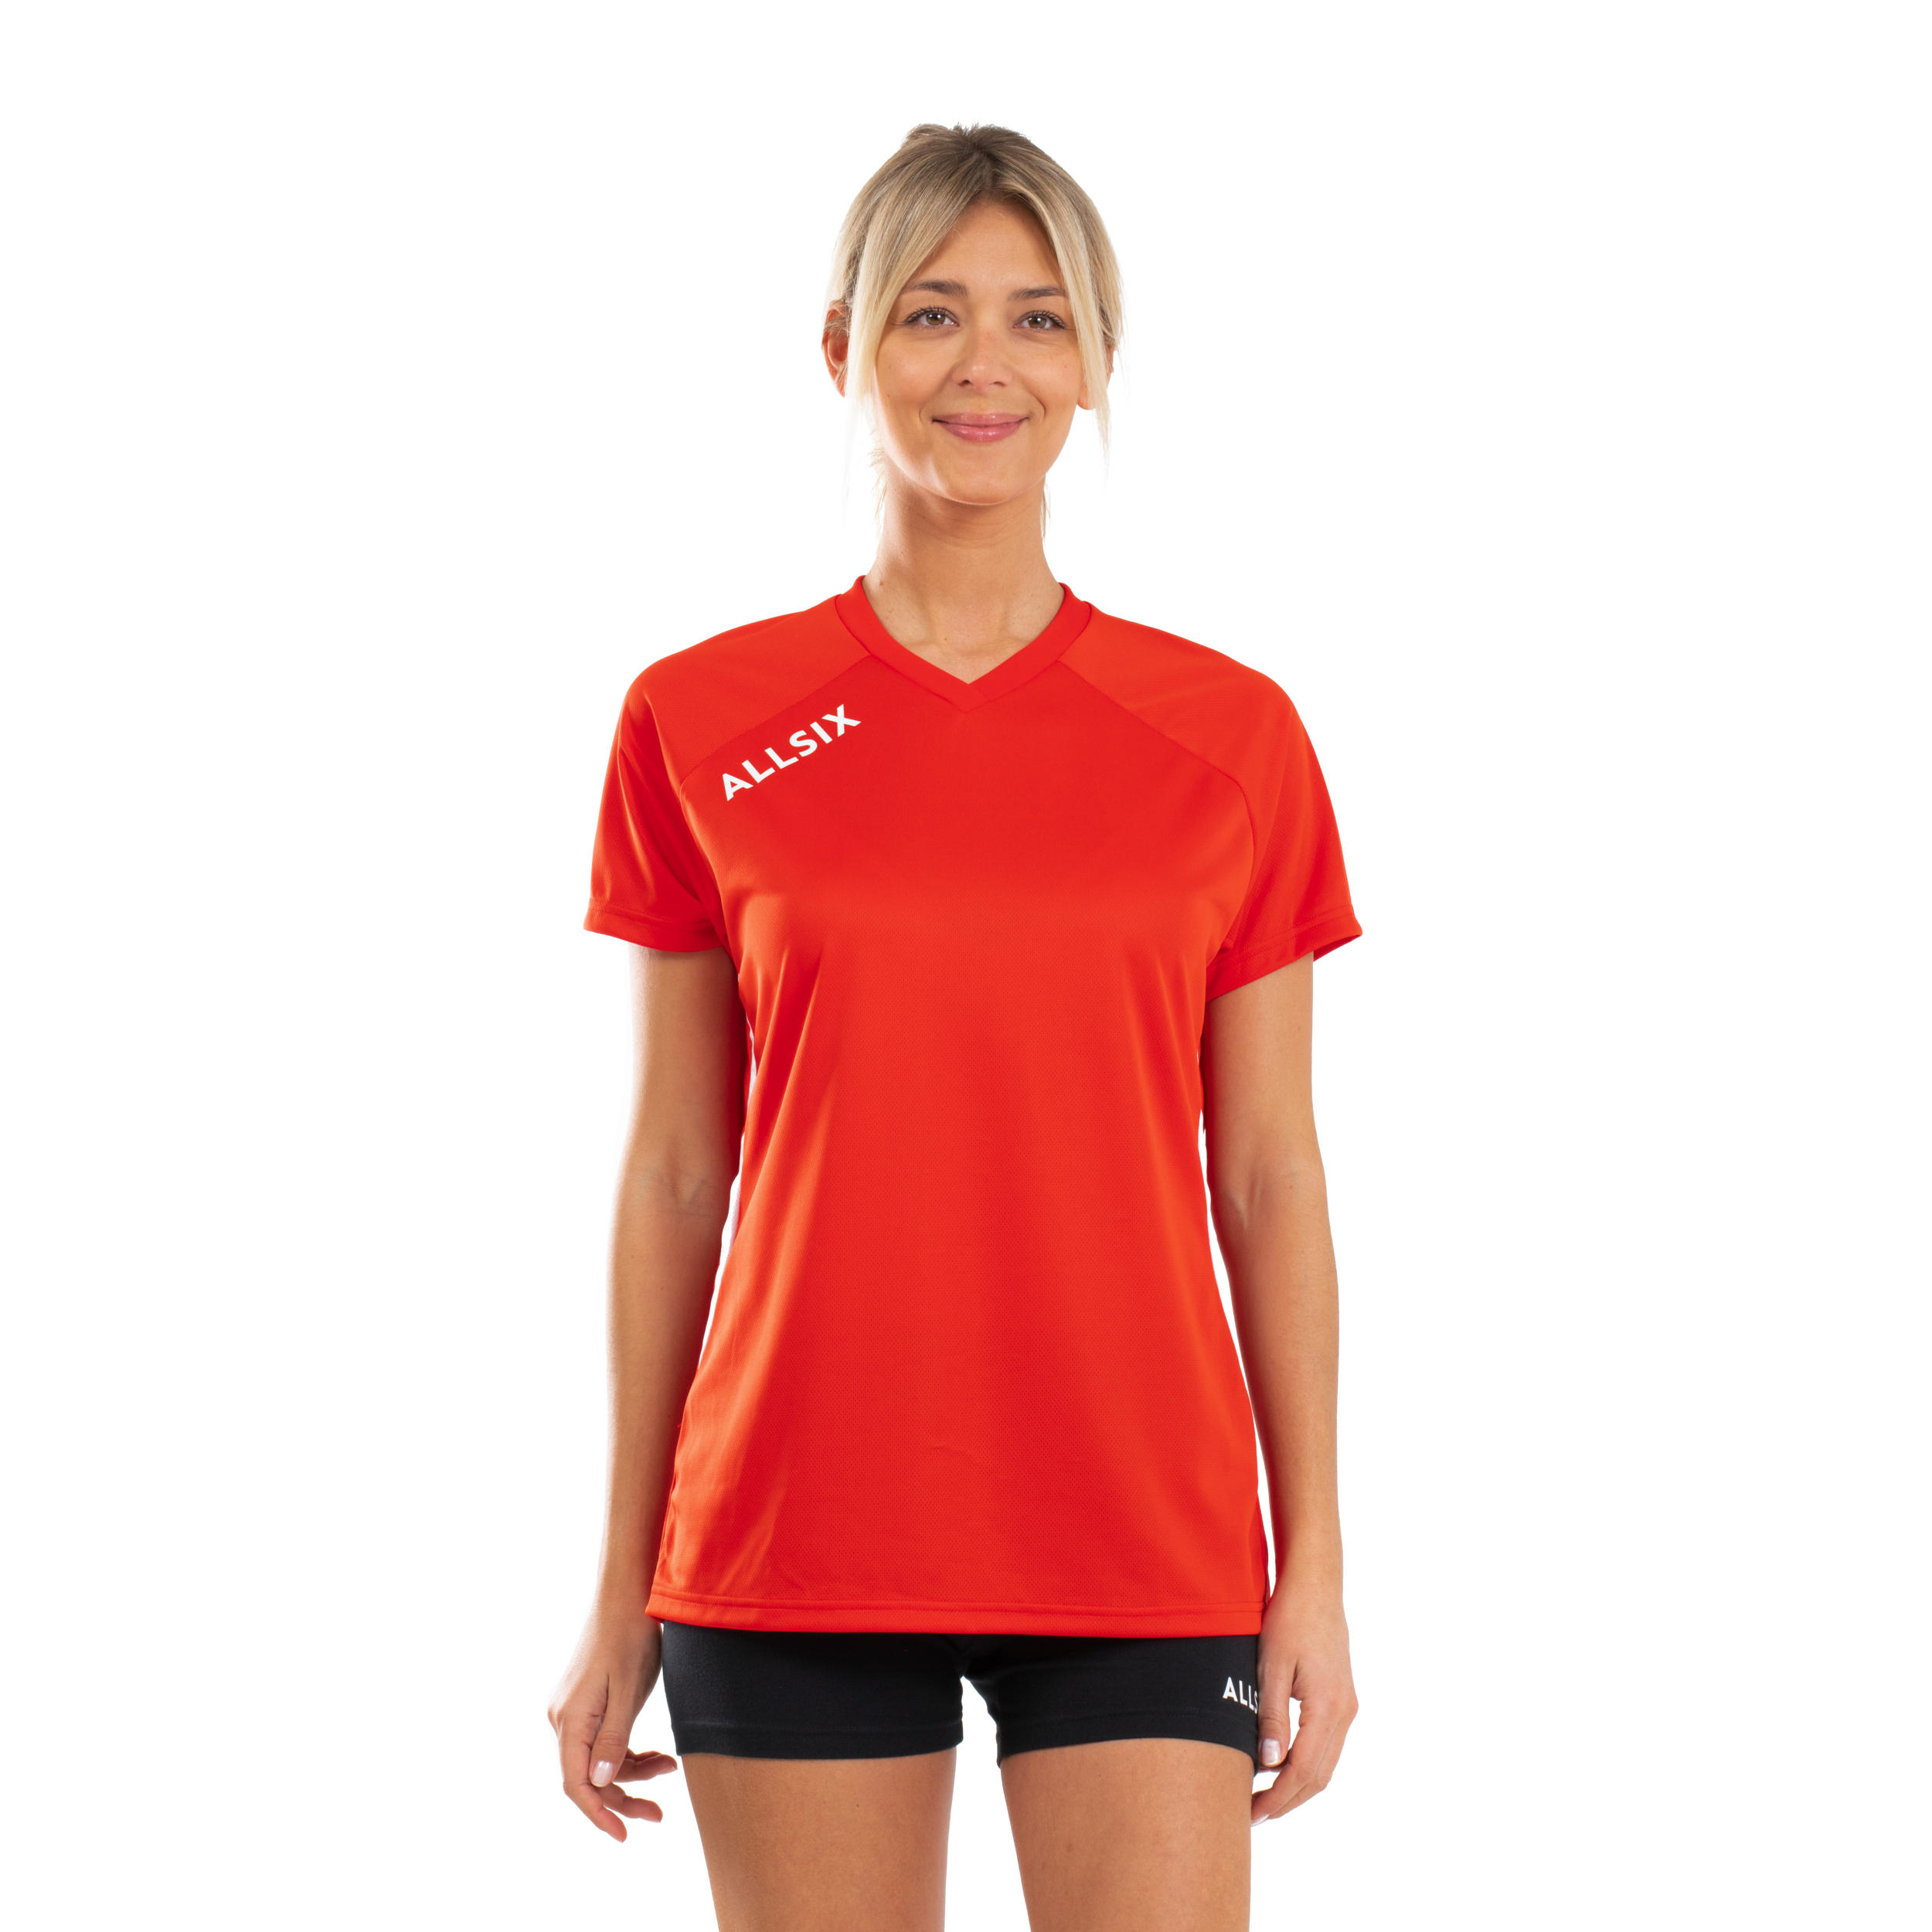 V100 Women's Volleyball Jersey - Red 3/8